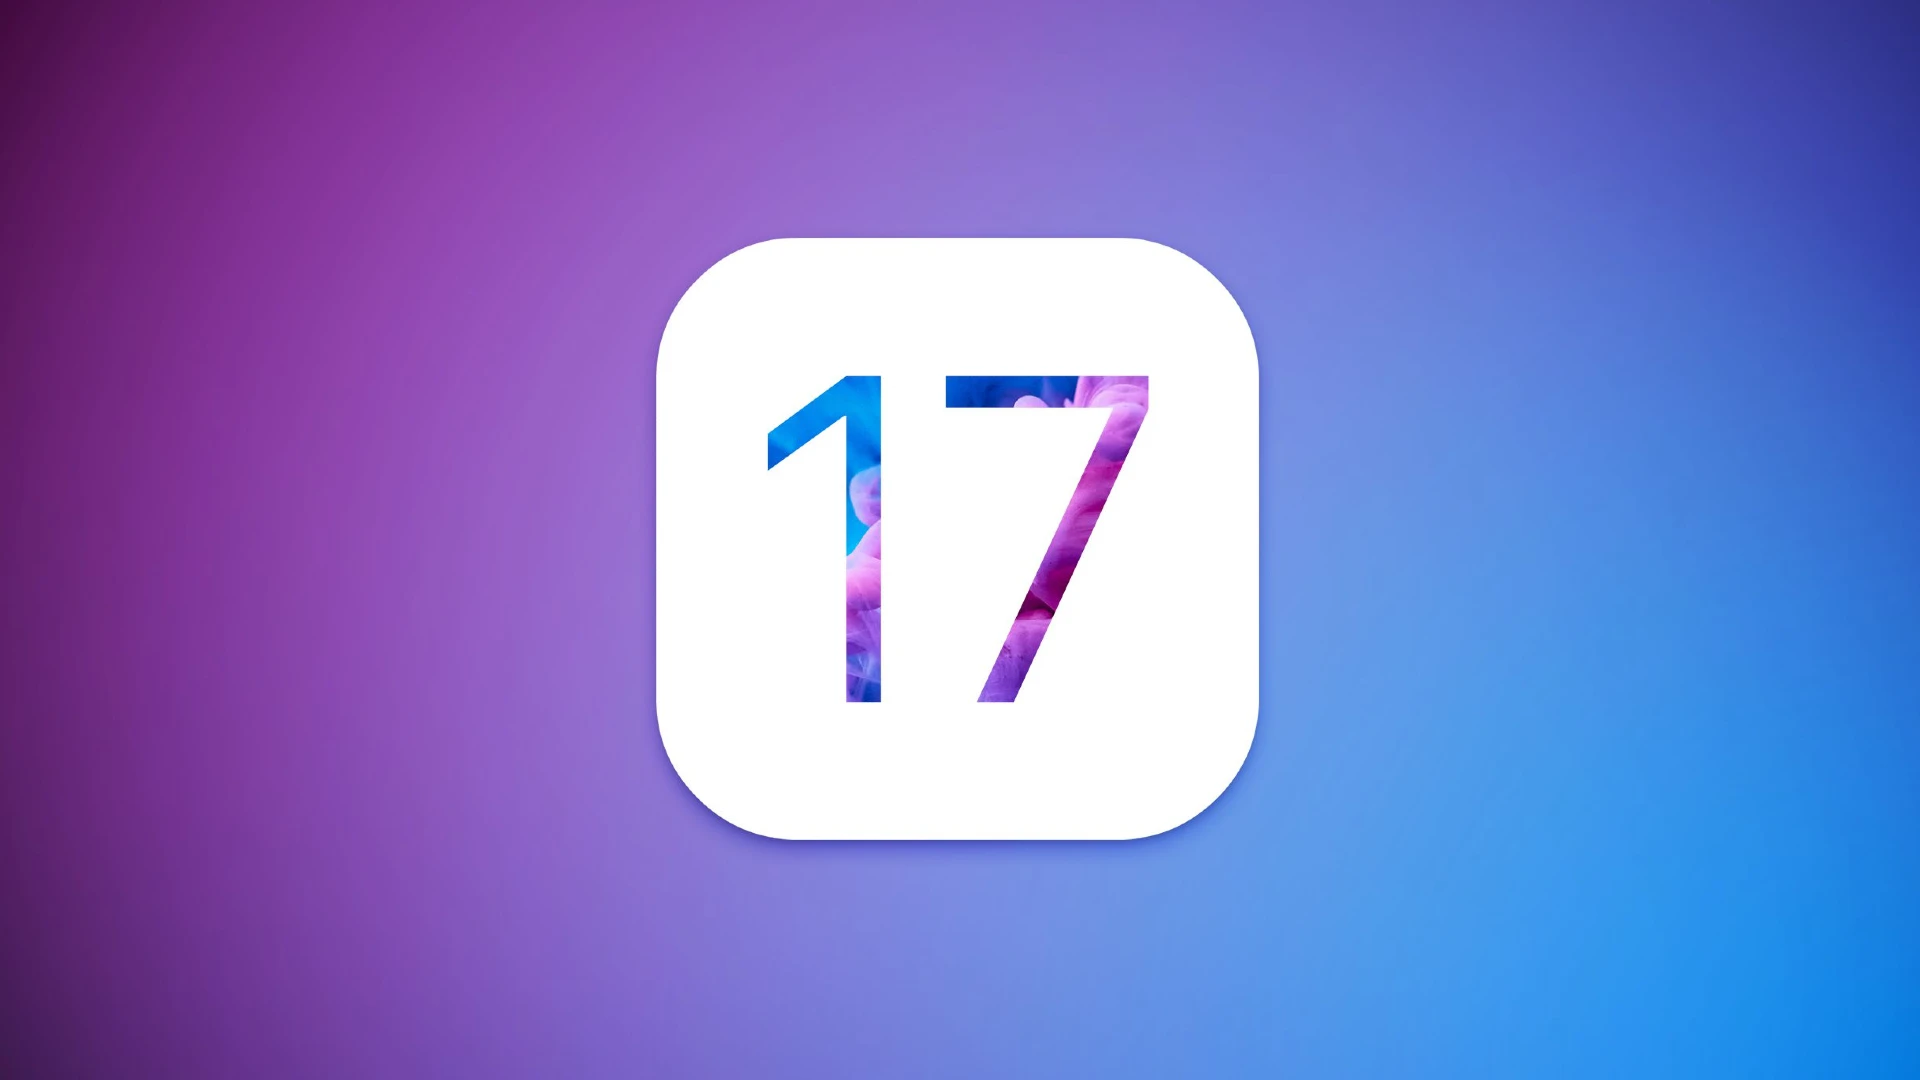 Confirmed: iOS 17 Will Launch On This Date For All iPhone Users Across The World!